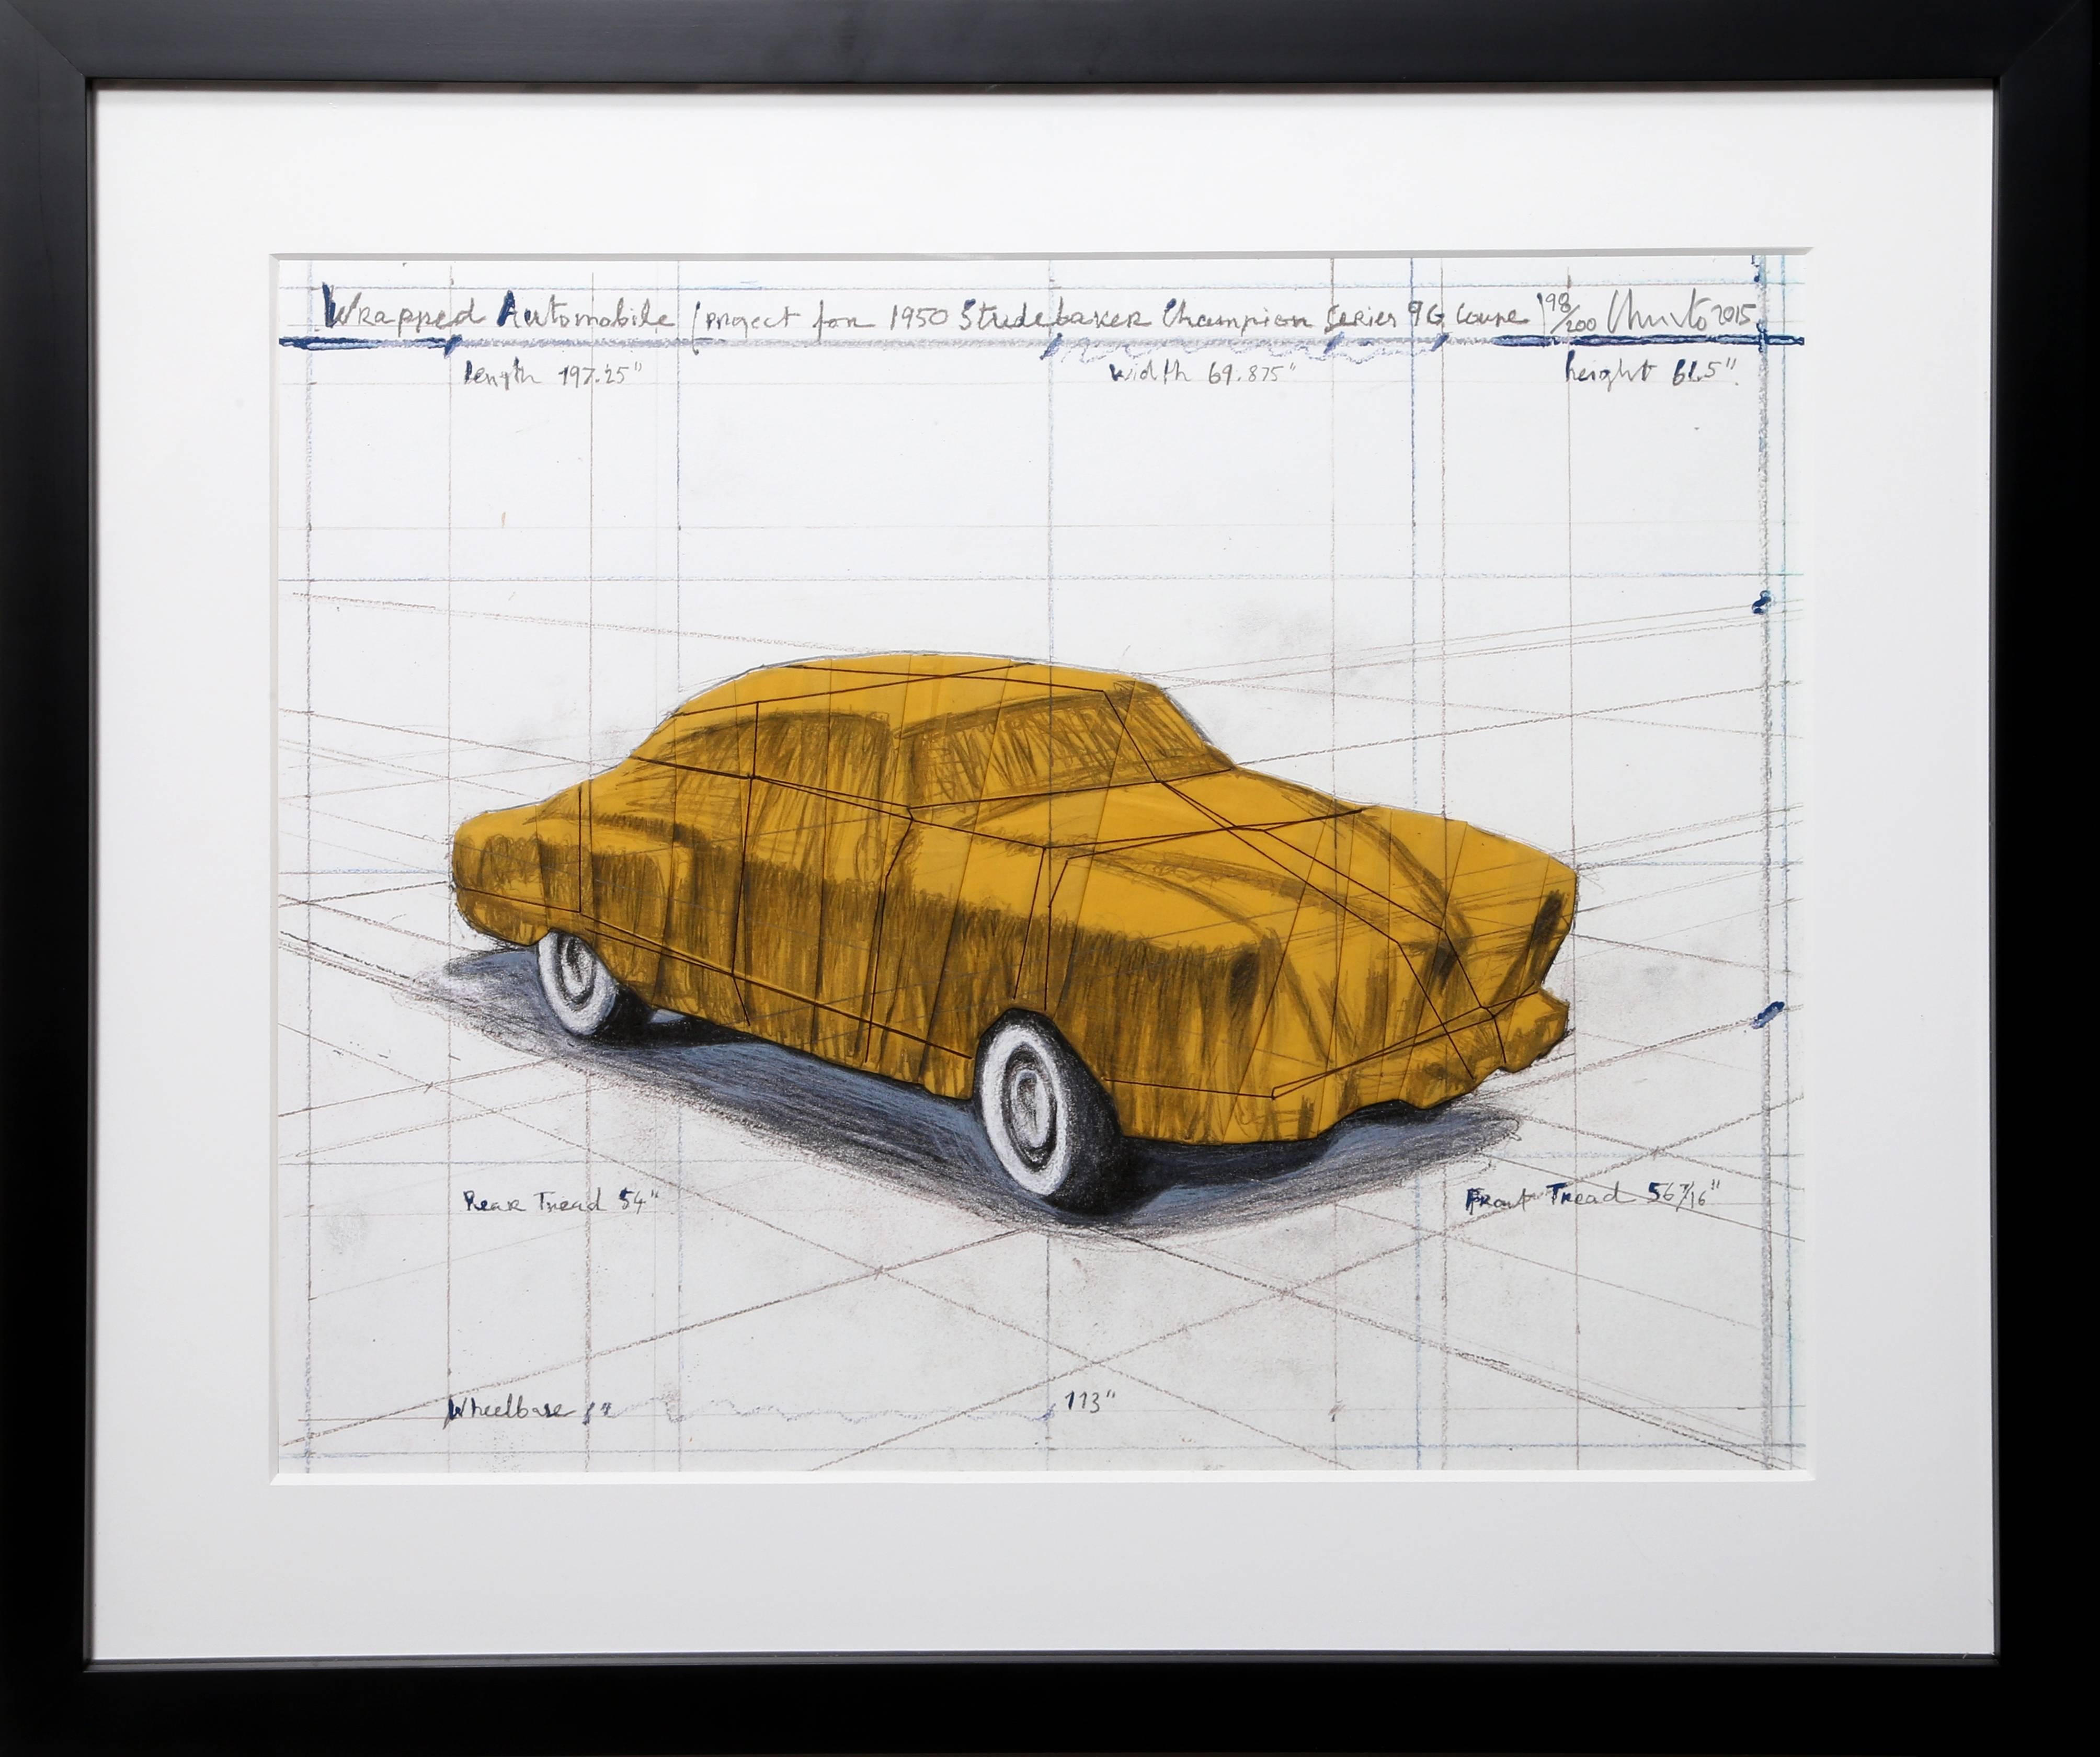 Christo and Jeanne-Claude Still-Life Print - Wrapped Automobile: Project for 1950 Studebaker Champion Series 9G